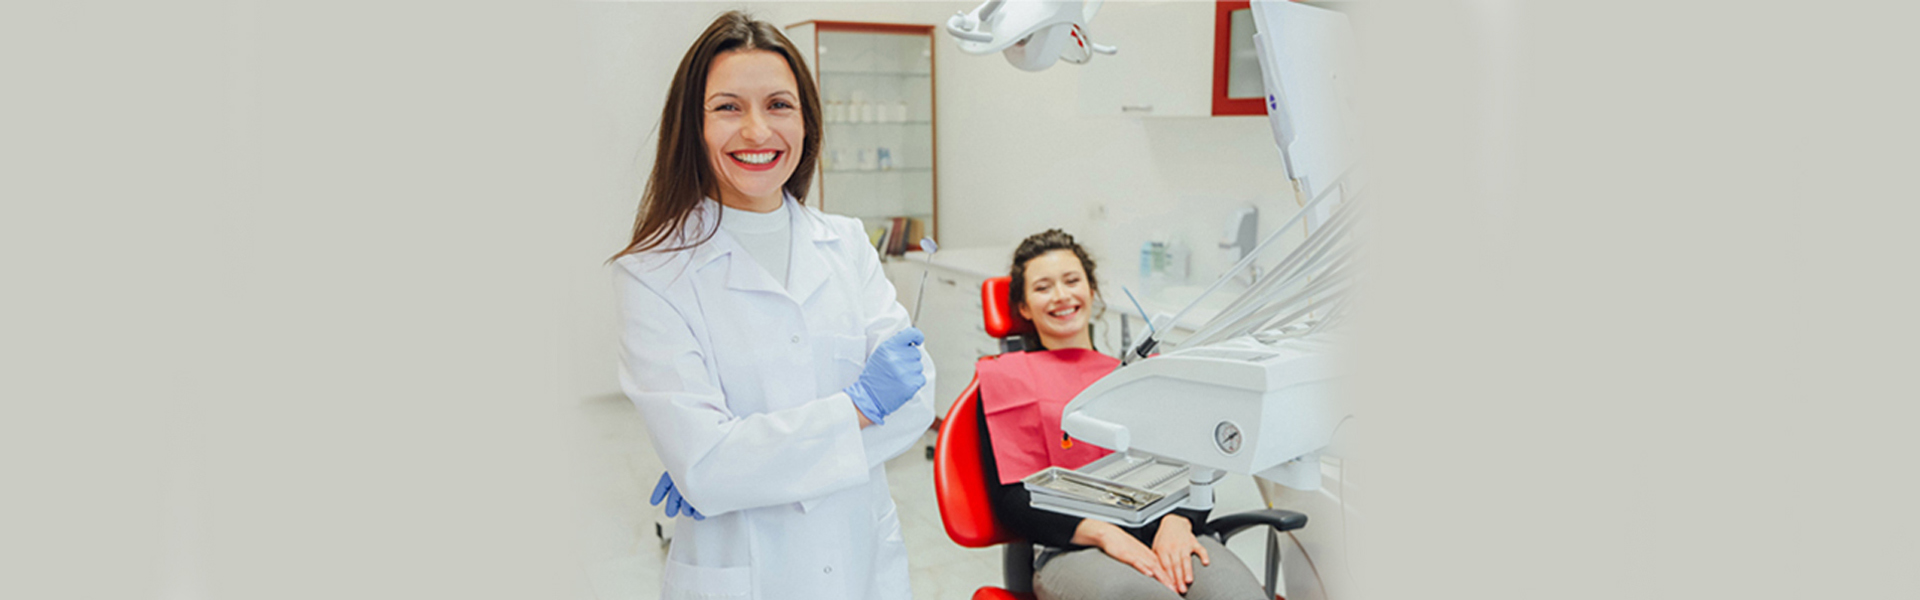 Types of Dental Implant Restorations: Which One Is Right for You?